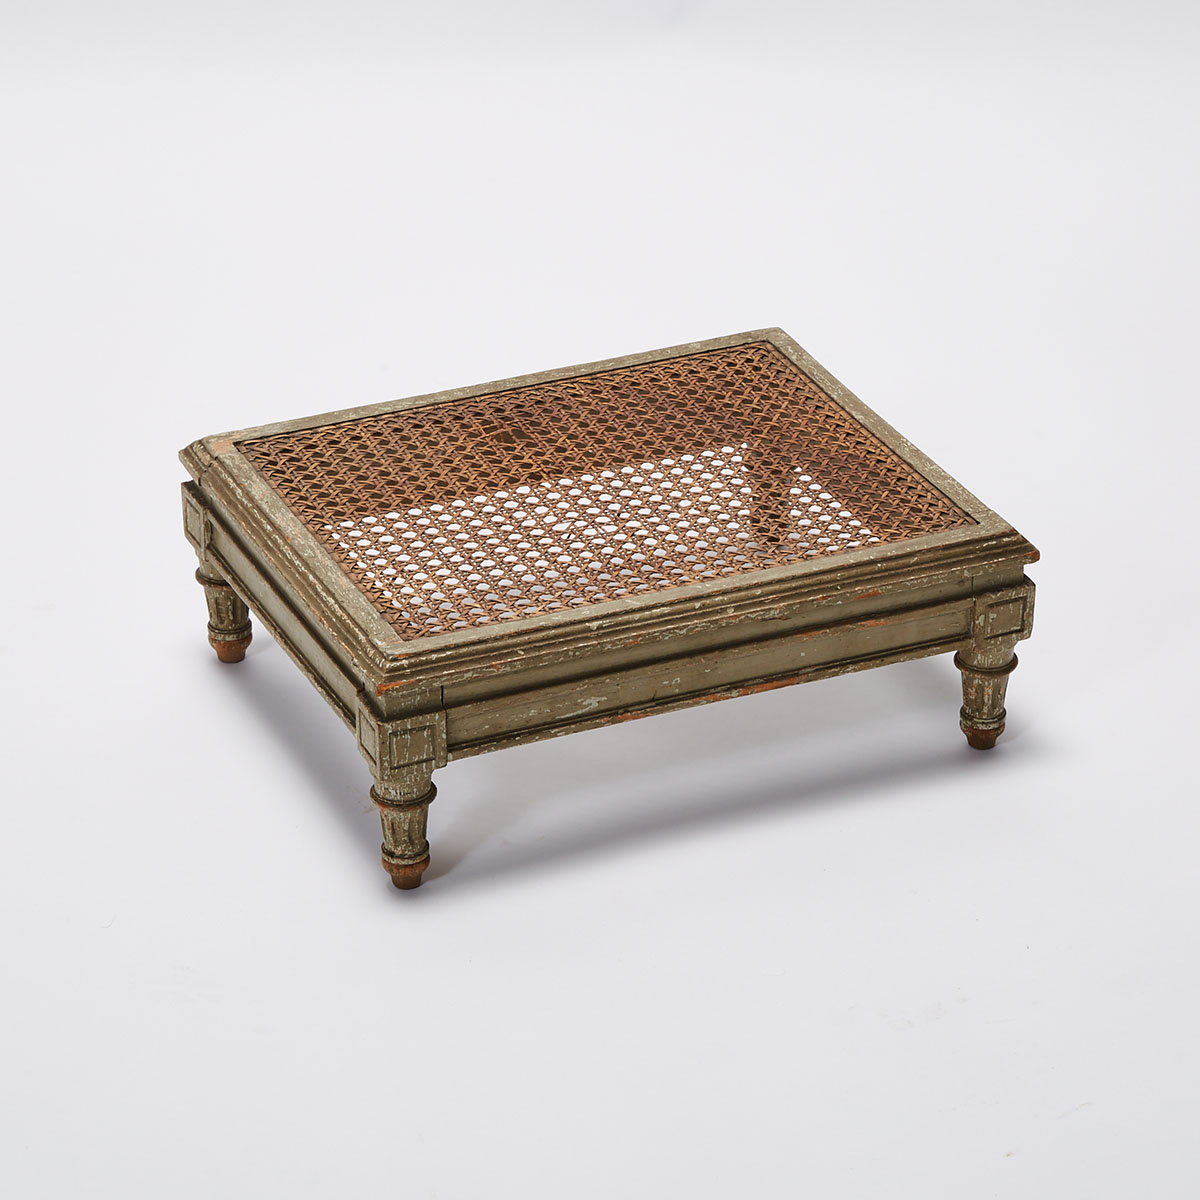 French Provincial Painted and Caned Footstool, 18th/19th century